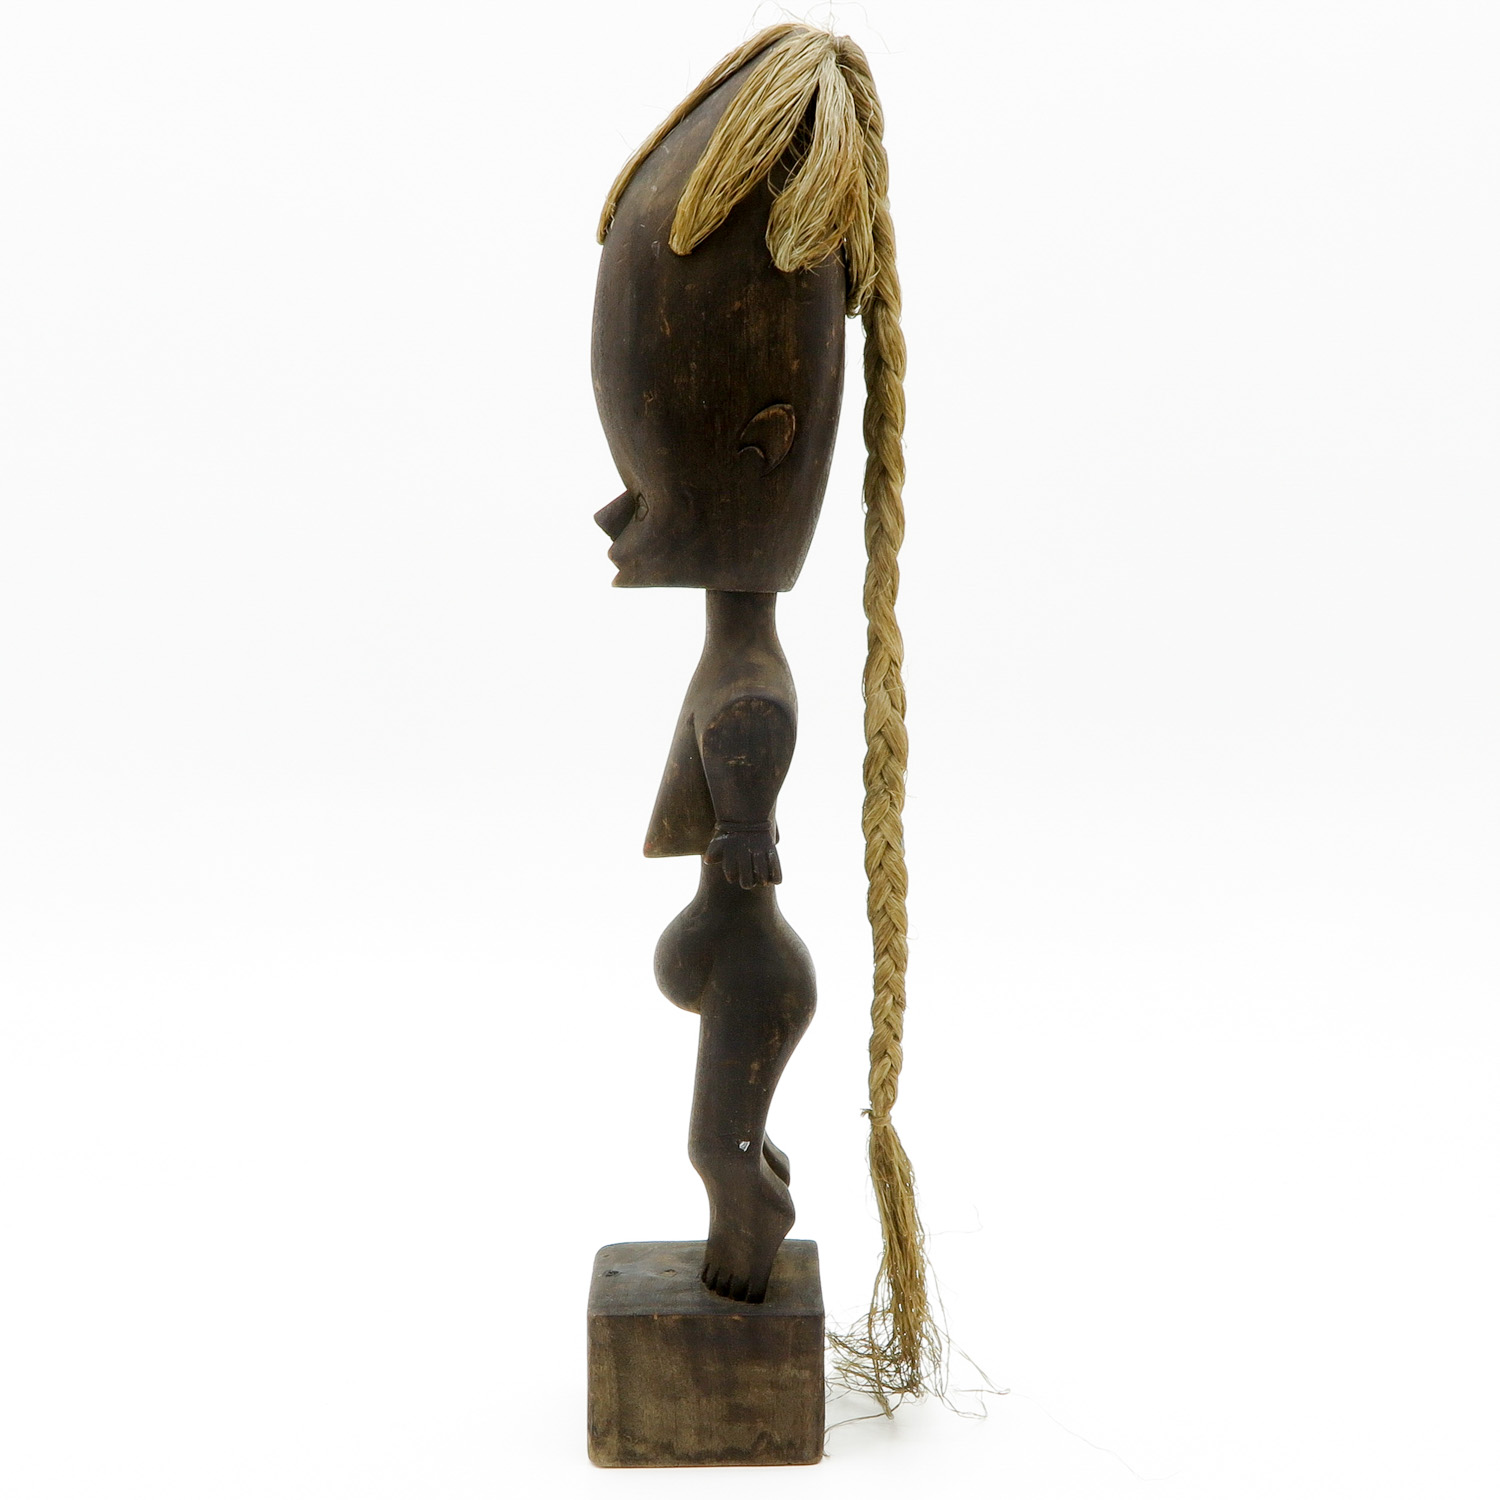 Ethnographic Carved Wood Sculpture - Image 2 of 5